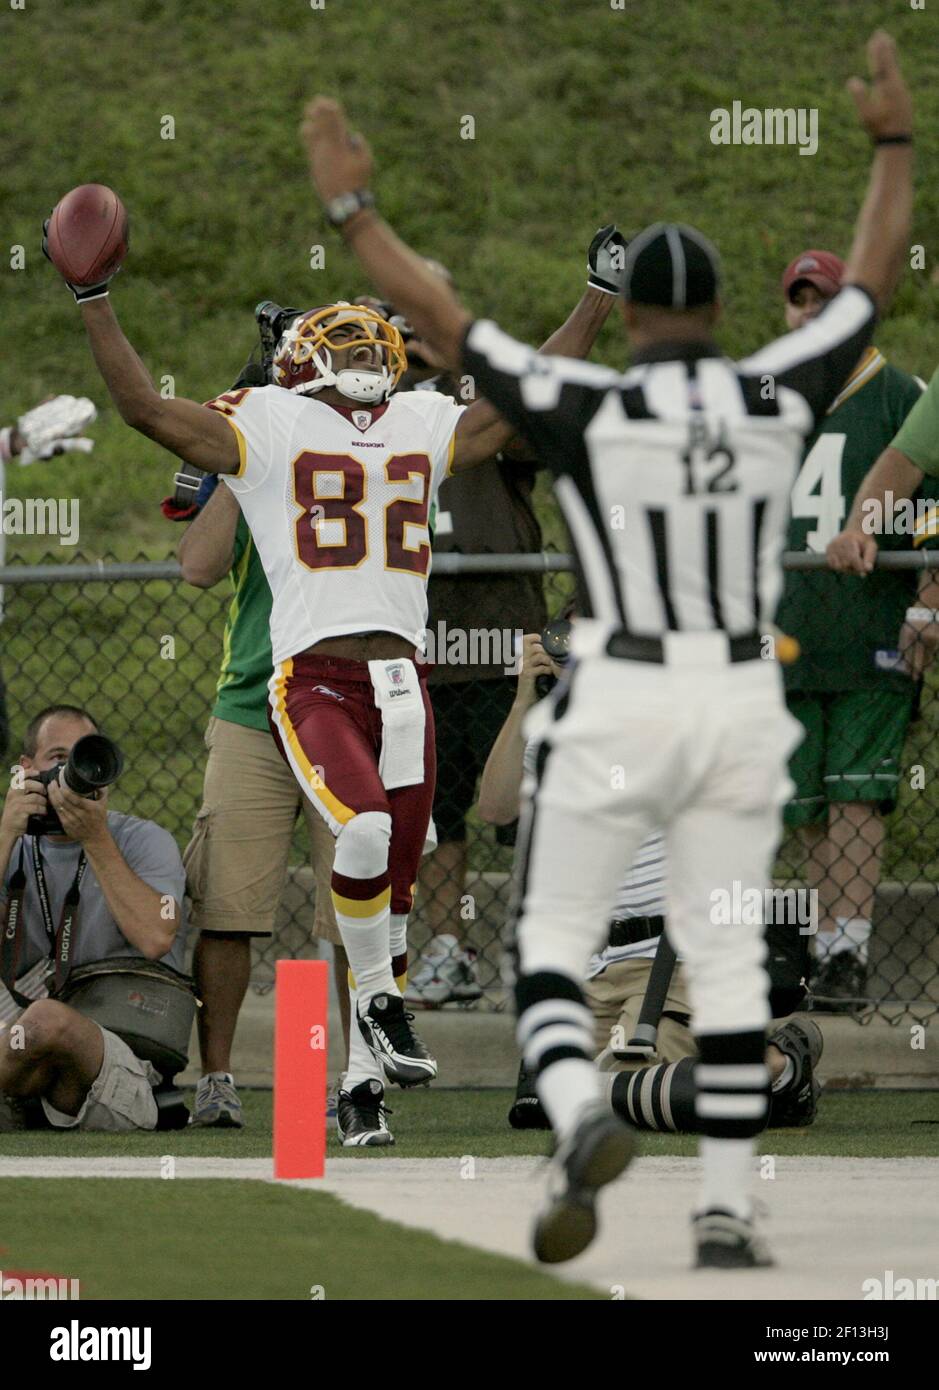 Washington Redskins receiver Antwaan Randal El celebrates his 20-yard touchdown catch in the first quarter against the Indianapolis Colts during the Pro Football Hall of Fame Game at Fawcett Stadium in Canton, Ohio, Sunday, August 3, 2008. (Photo by Bob DeMay/Akron Beacon Journal/MCT/Sipa USA) Stock Photo